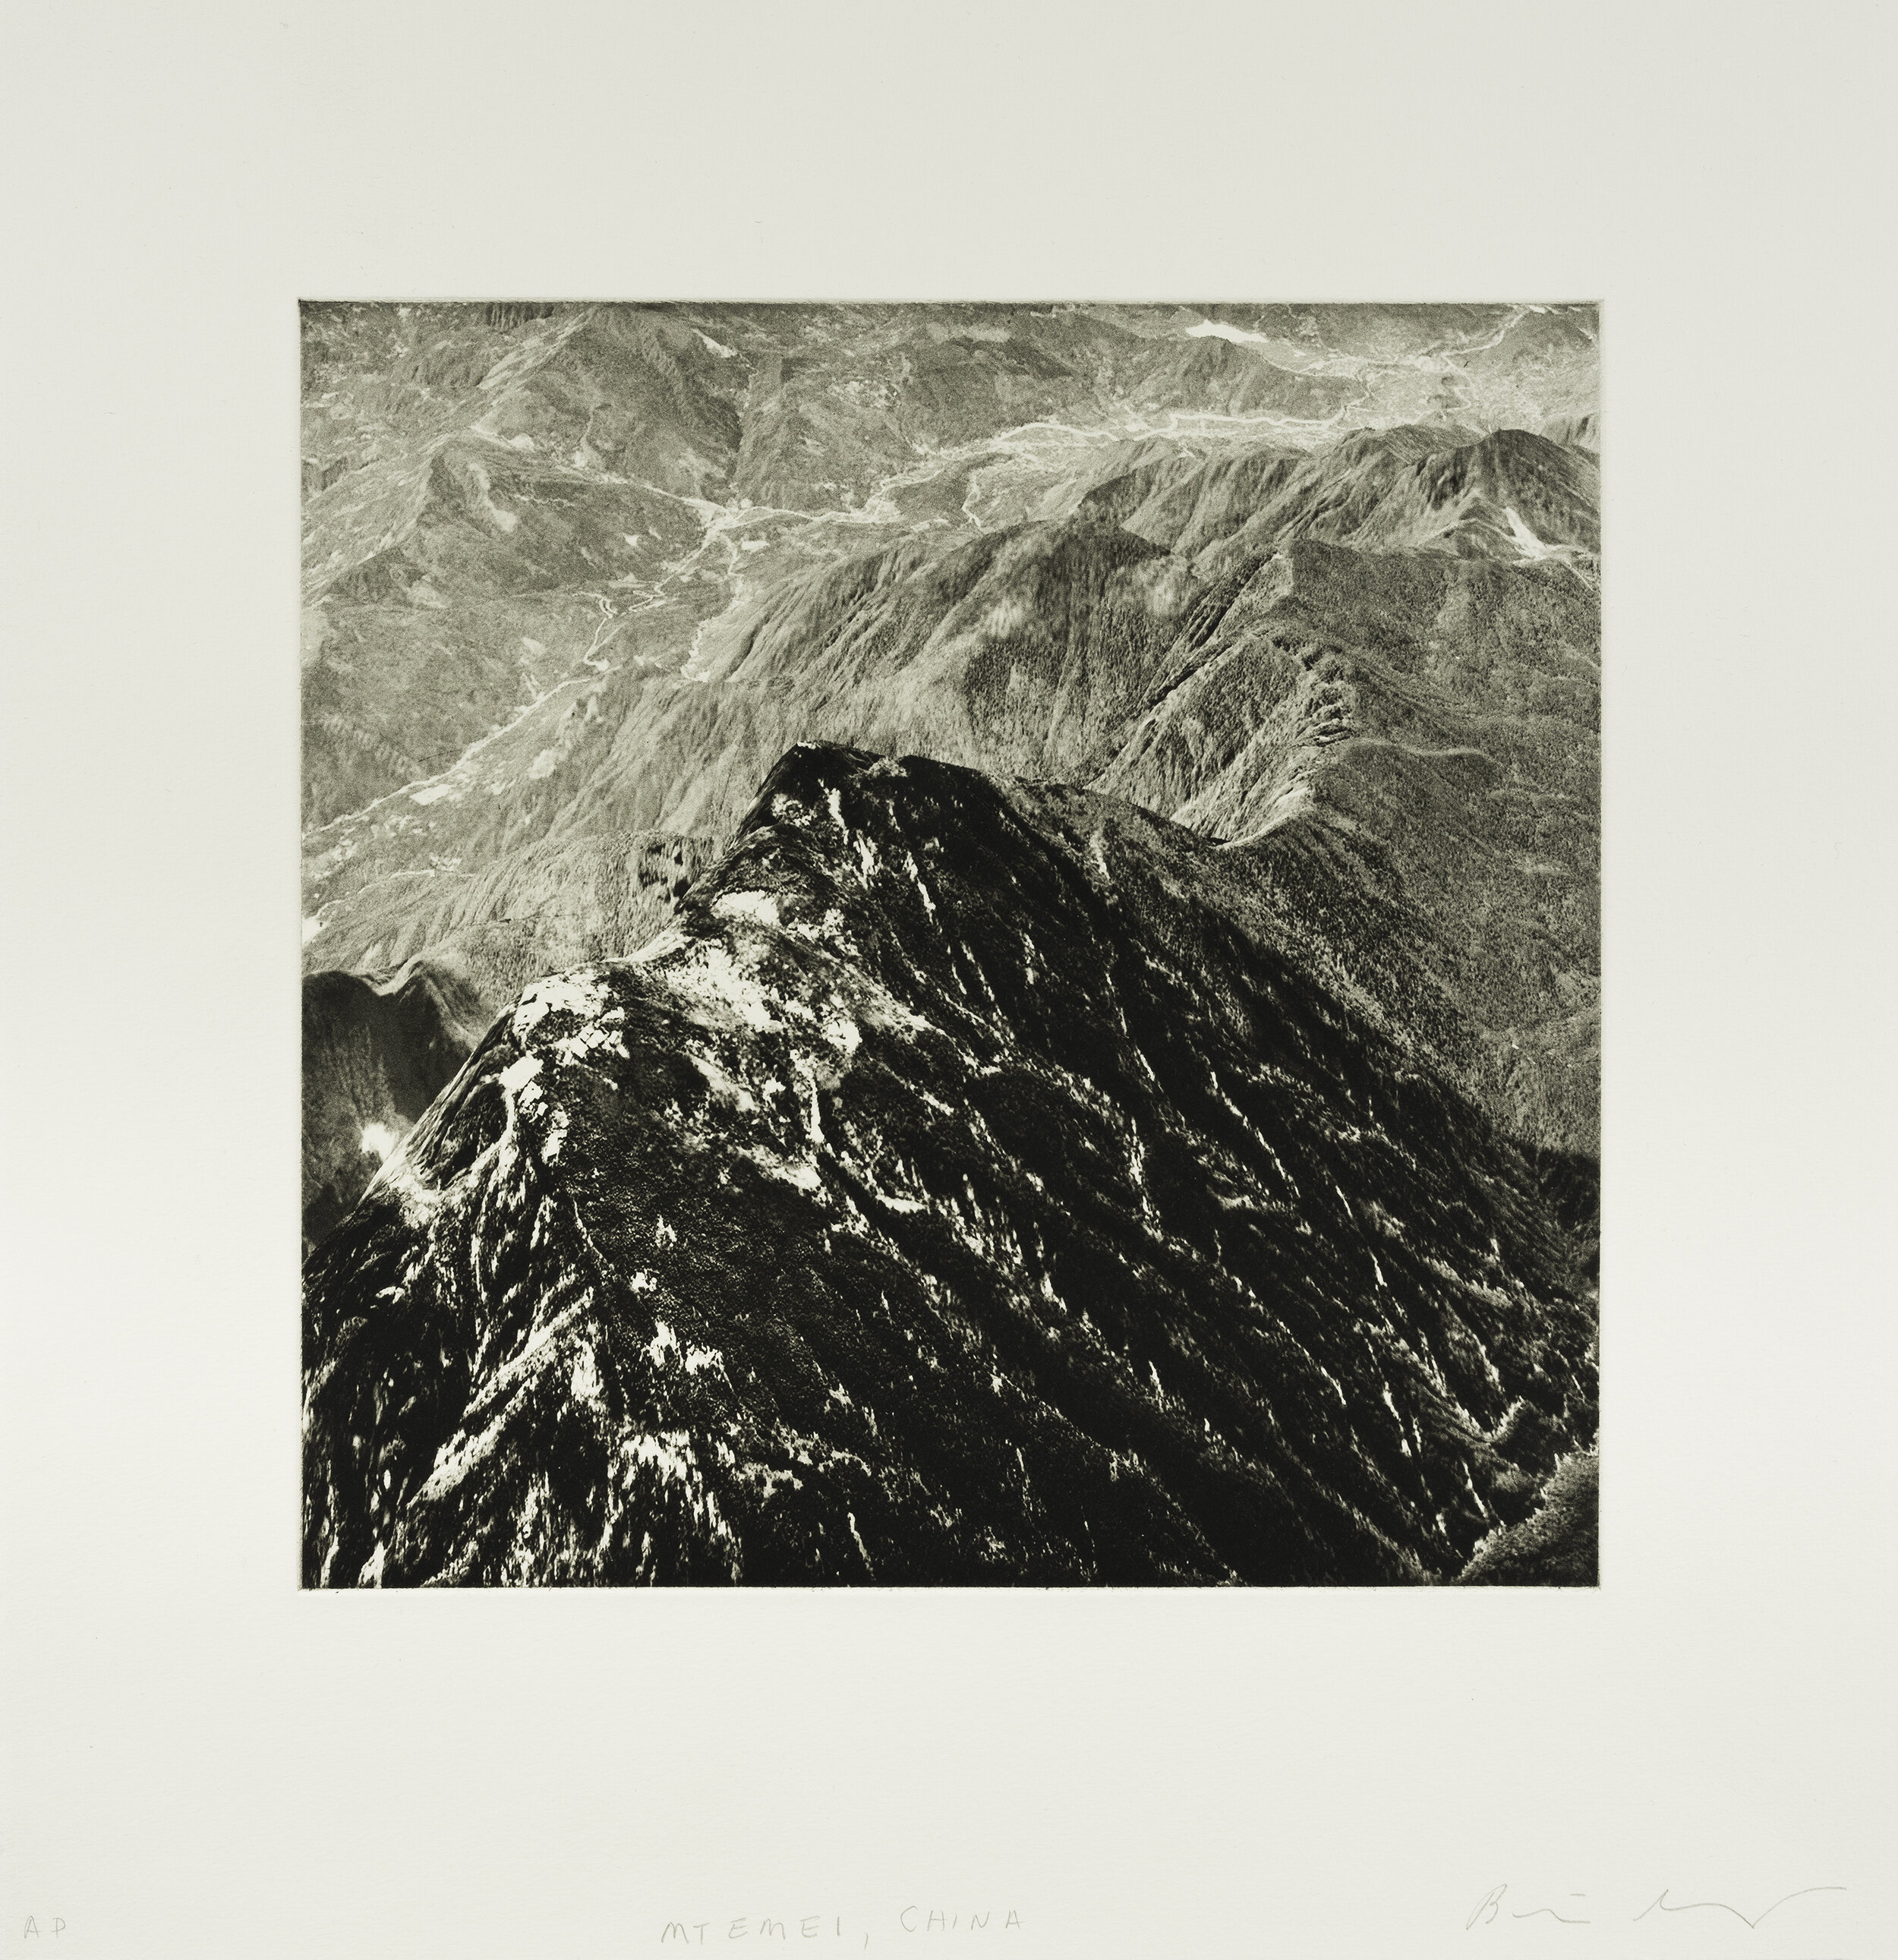    Mount Emei, China, 2020    Copperplate photogravure etching on cotton rag paper, plate size; 10.6 x 10.6, paper size; 16 x 15.5, edition 10  